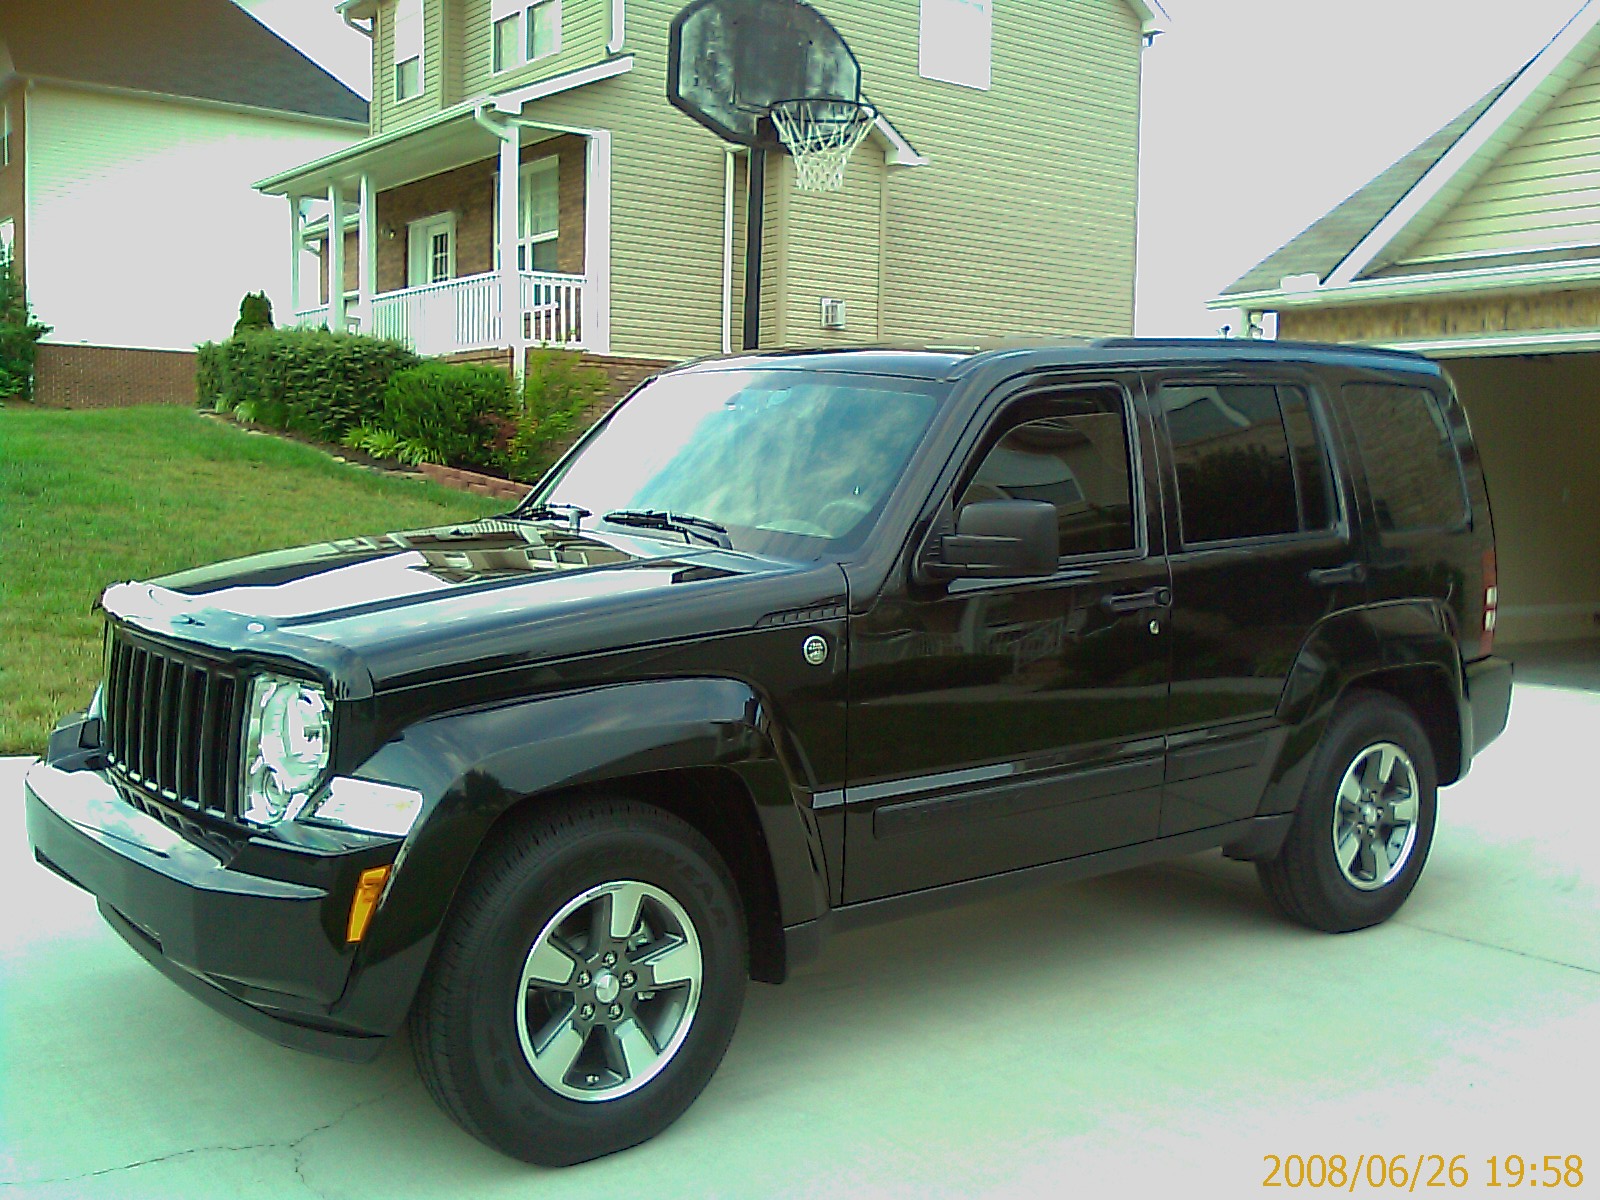 Reviews on the 2008 jeep liberty sport